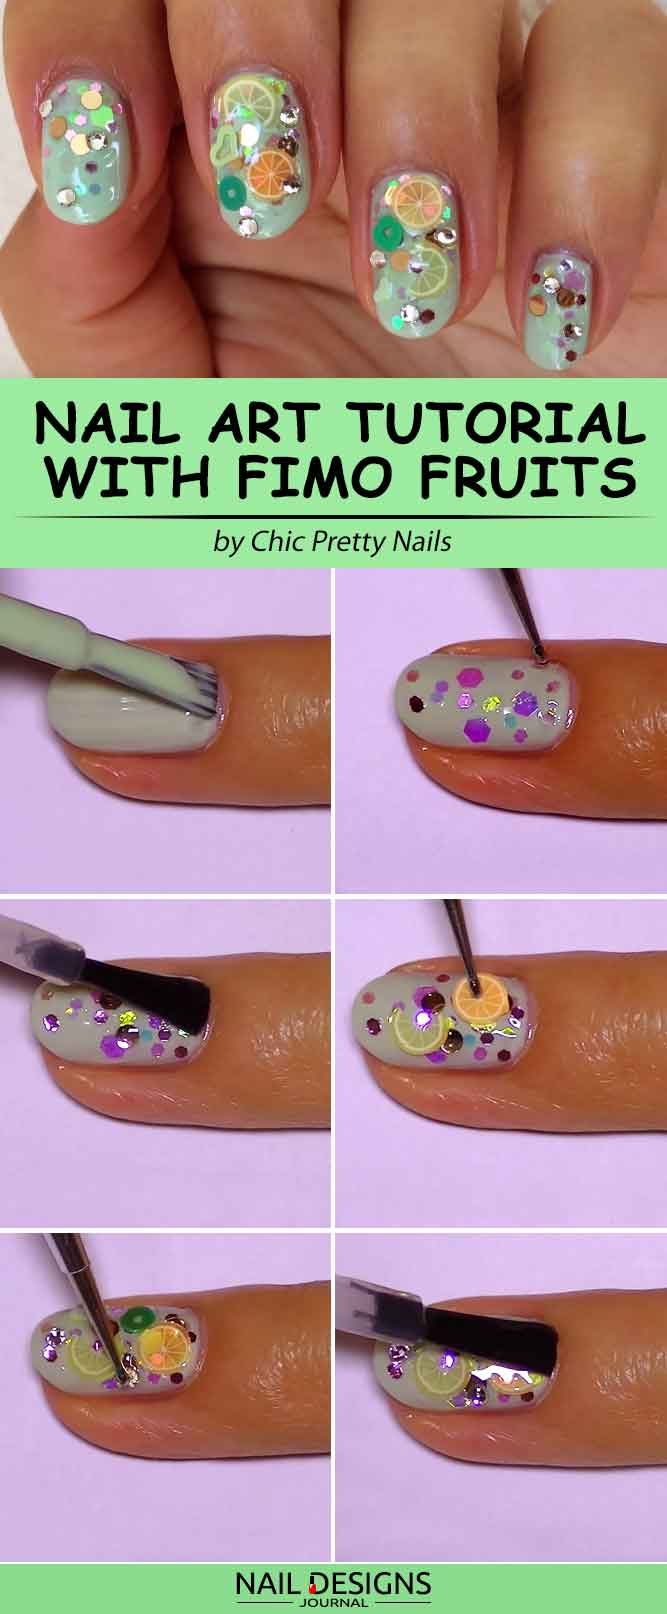 Pop Nail Art Tutorial With Fimo Citrus Fruits